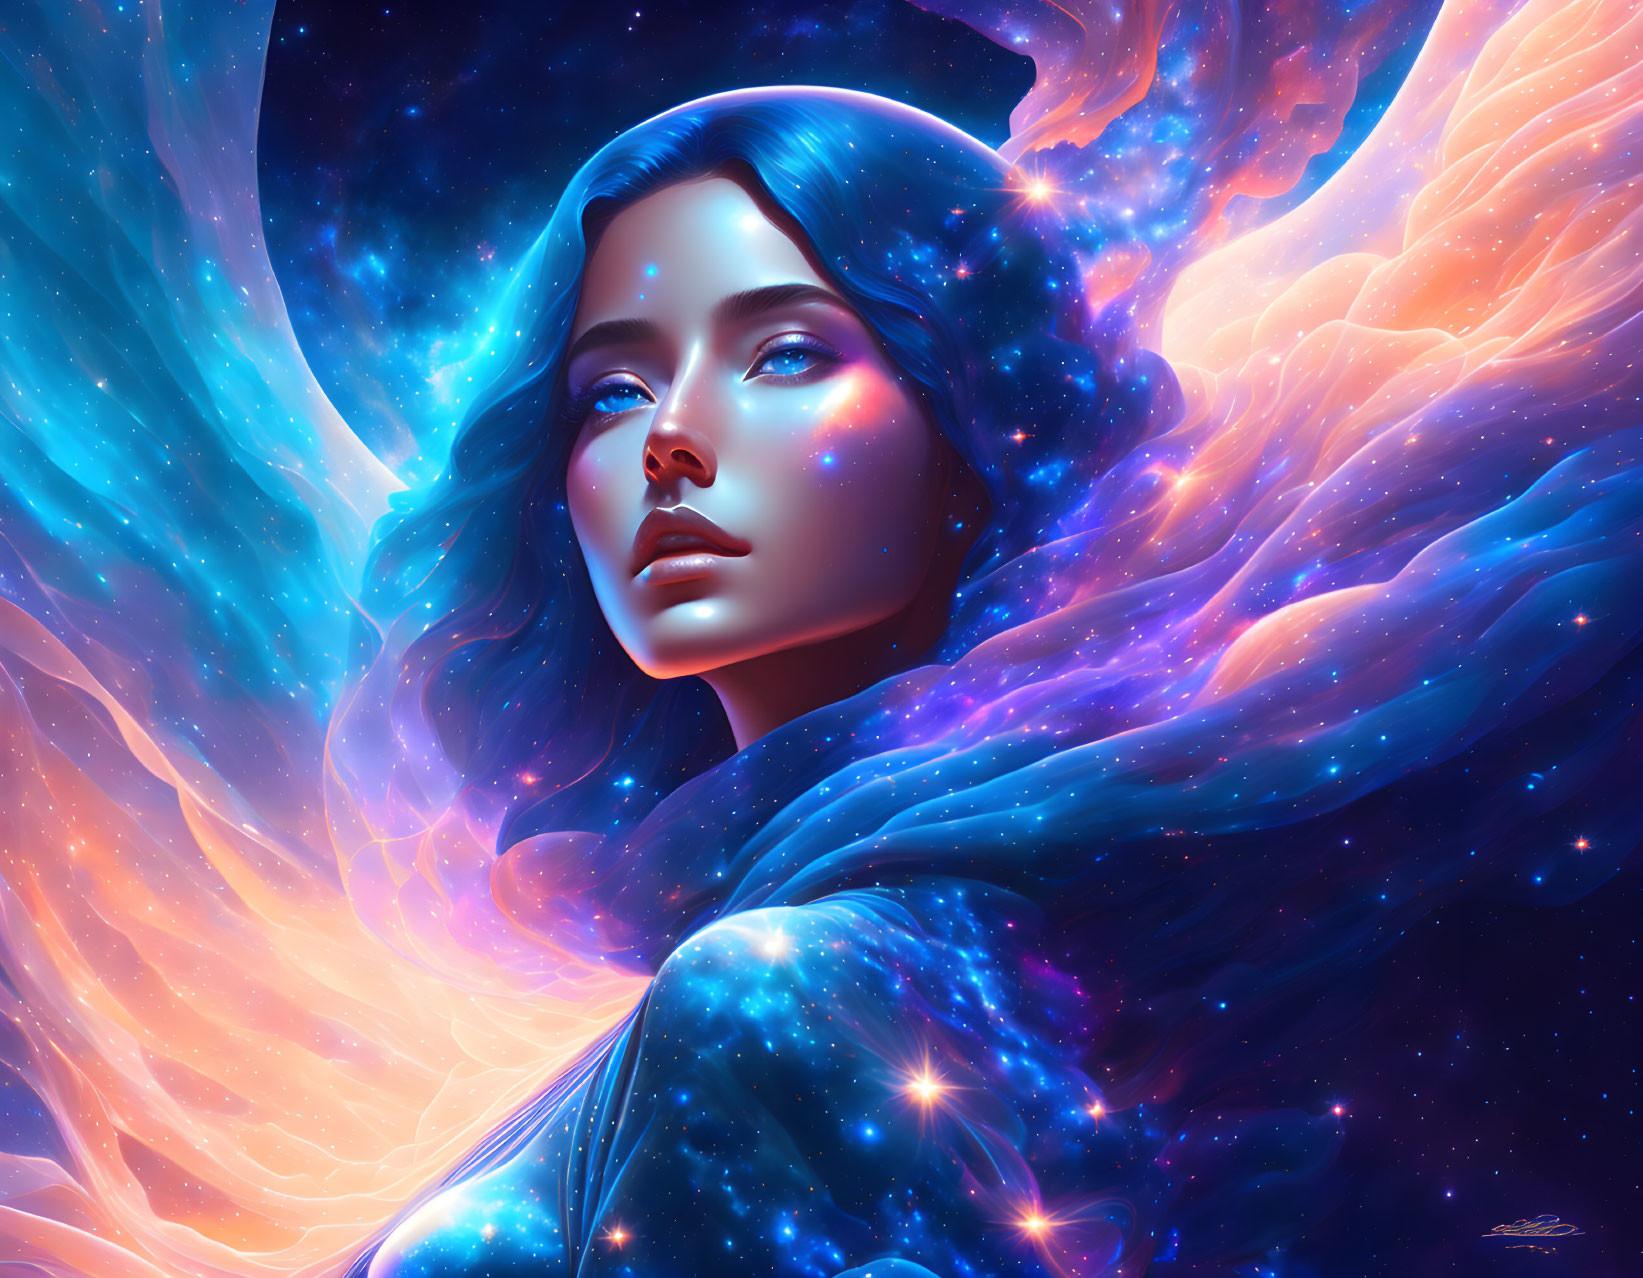 Digital artwork featuring woman with cosmic features